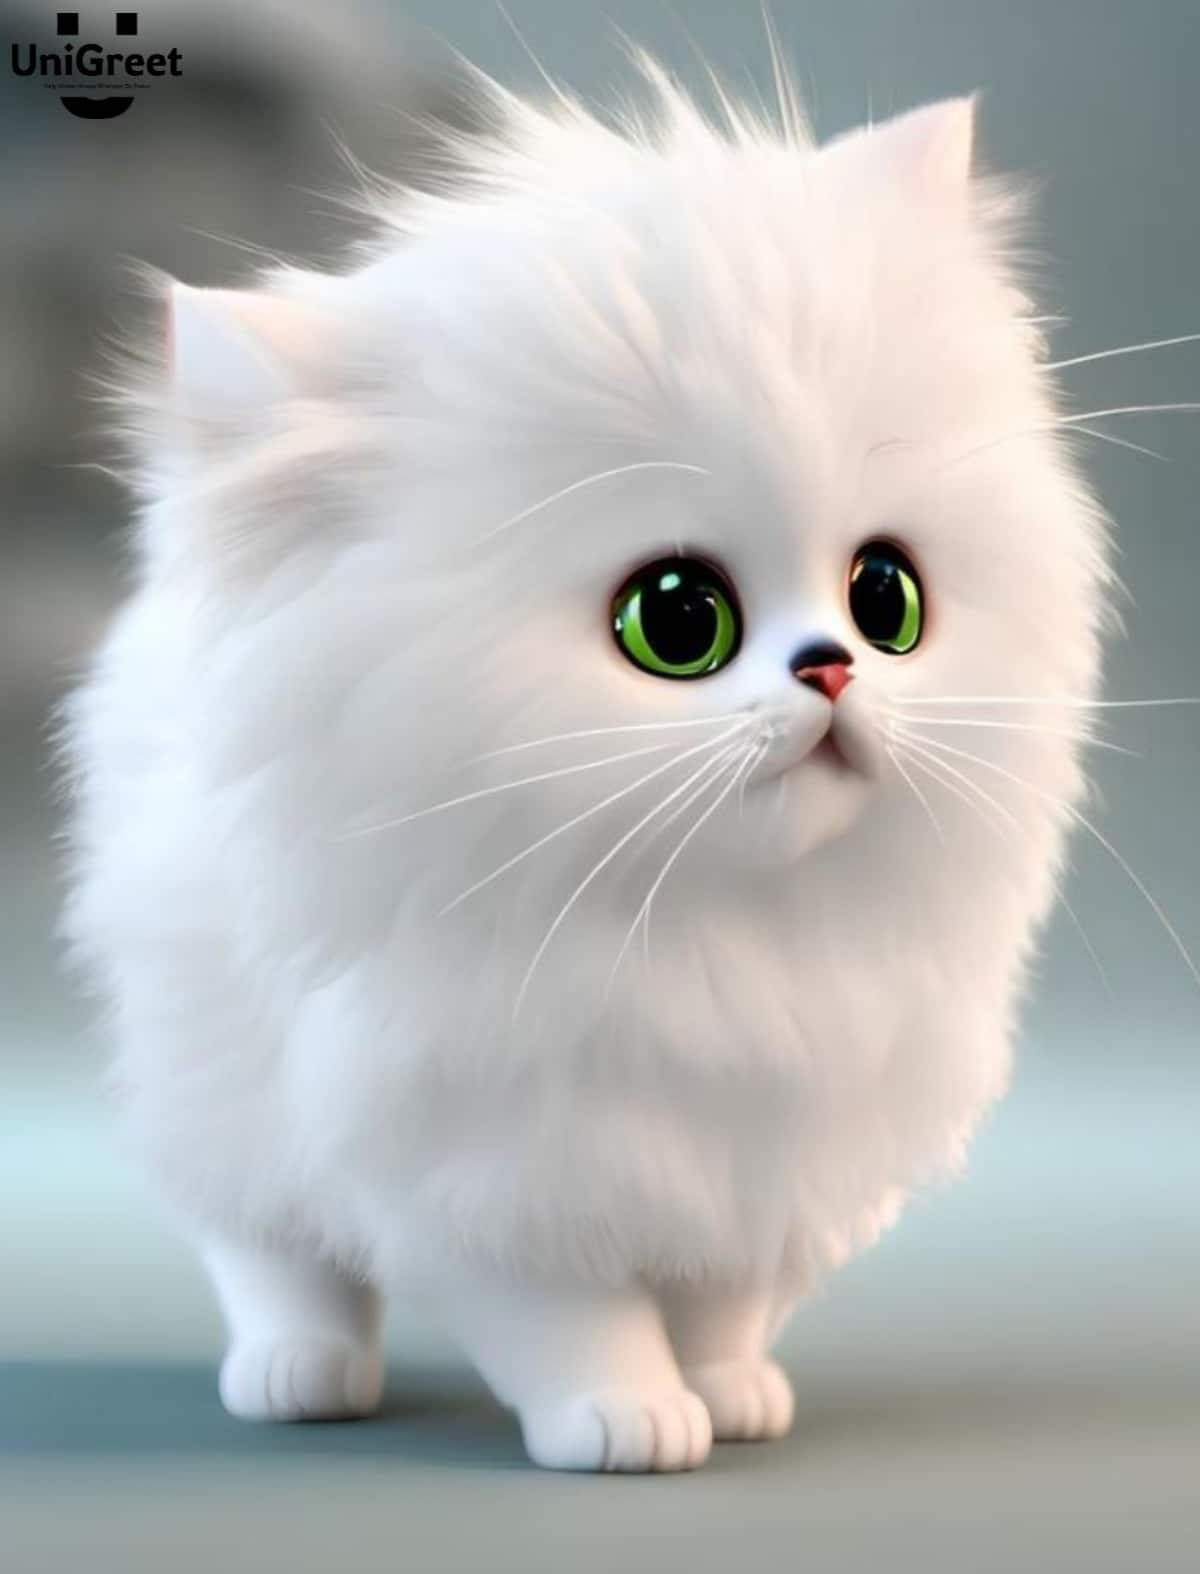 Ultimate Collection of 999+ Adorable Cat Images for Whatsapp DP – Stunning Full 4K Resolution